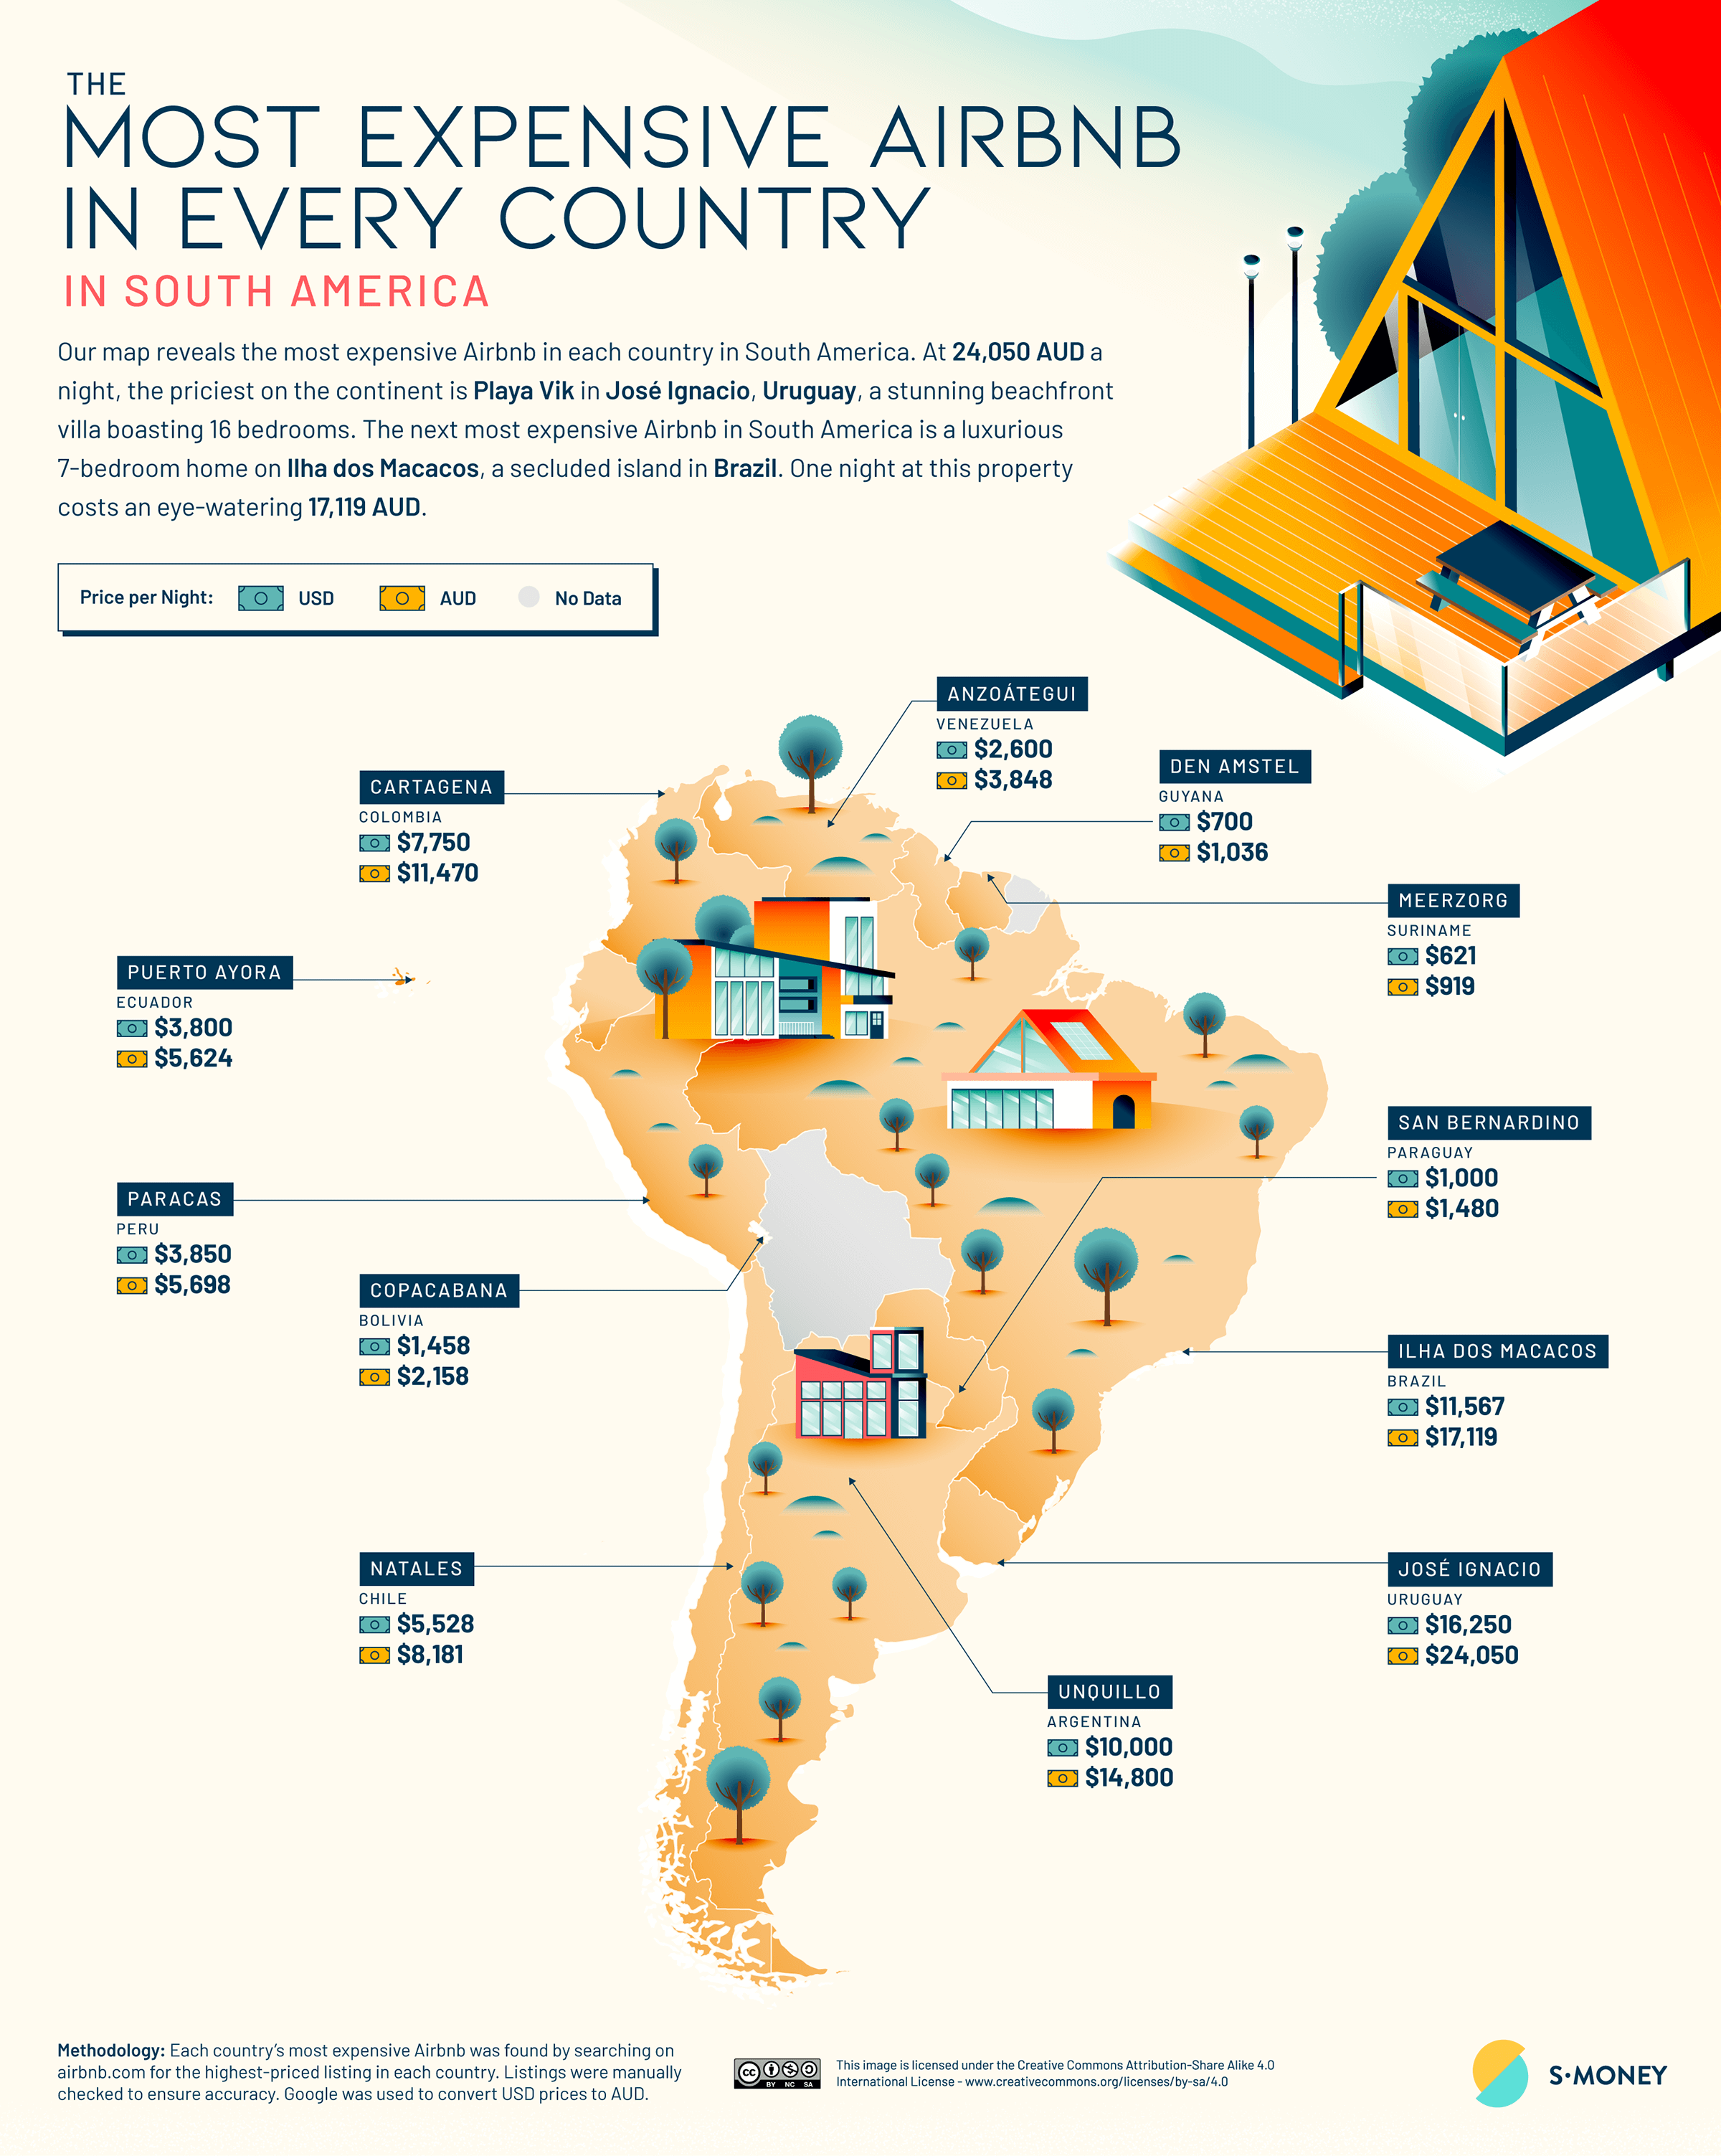 The Most Expensive Airbnb in South America